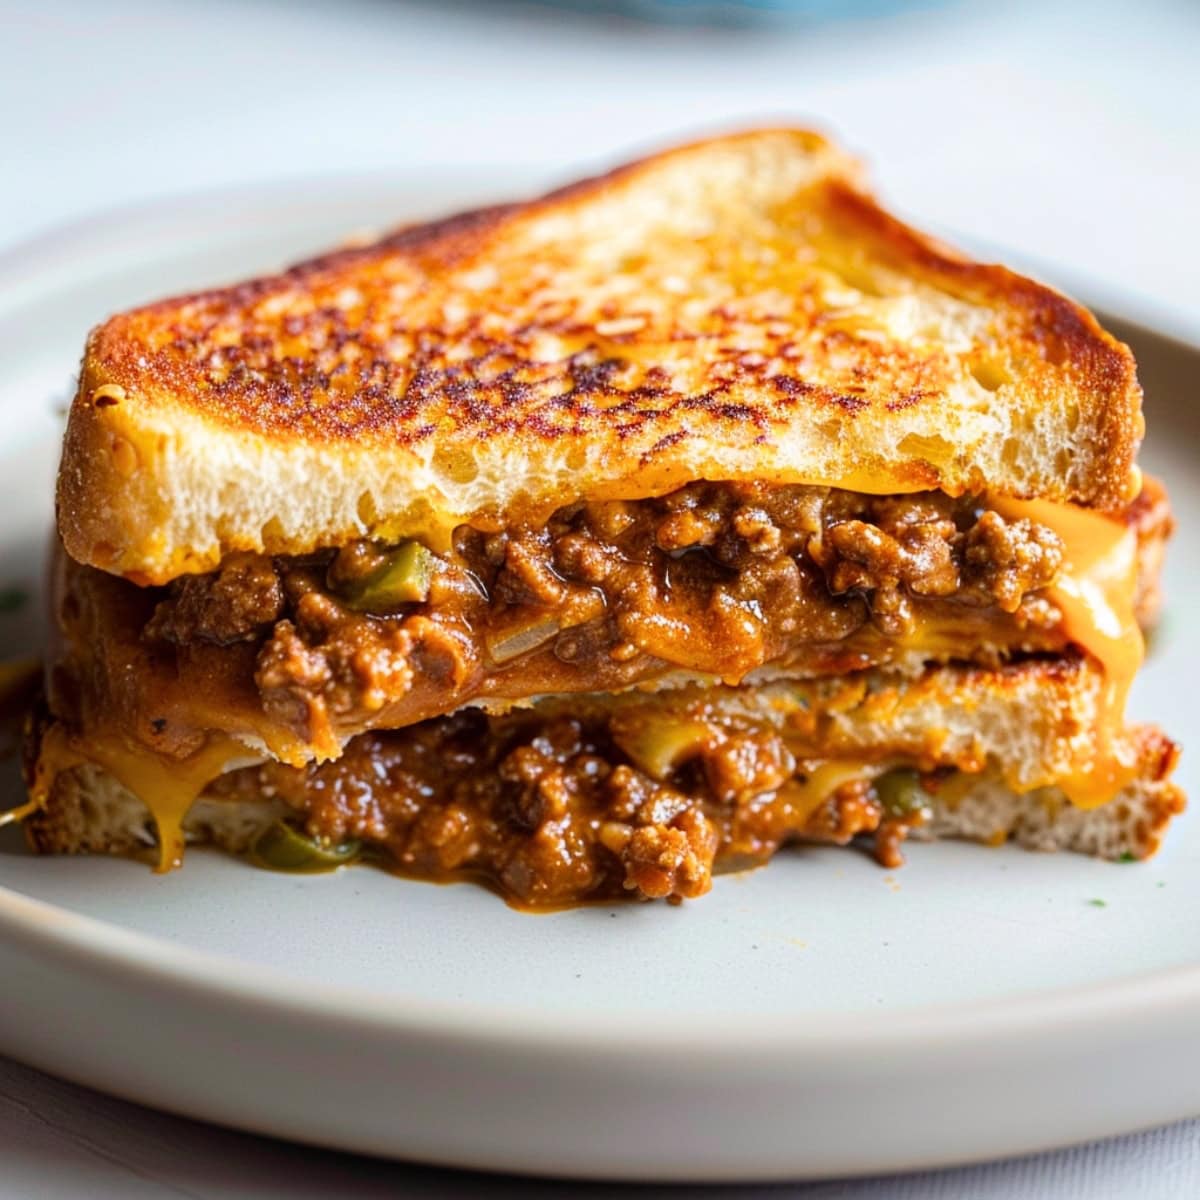 Savory sloppy joe grilled cheese with ground beef, served hot and crispy, with a perfectly toasted exterior.